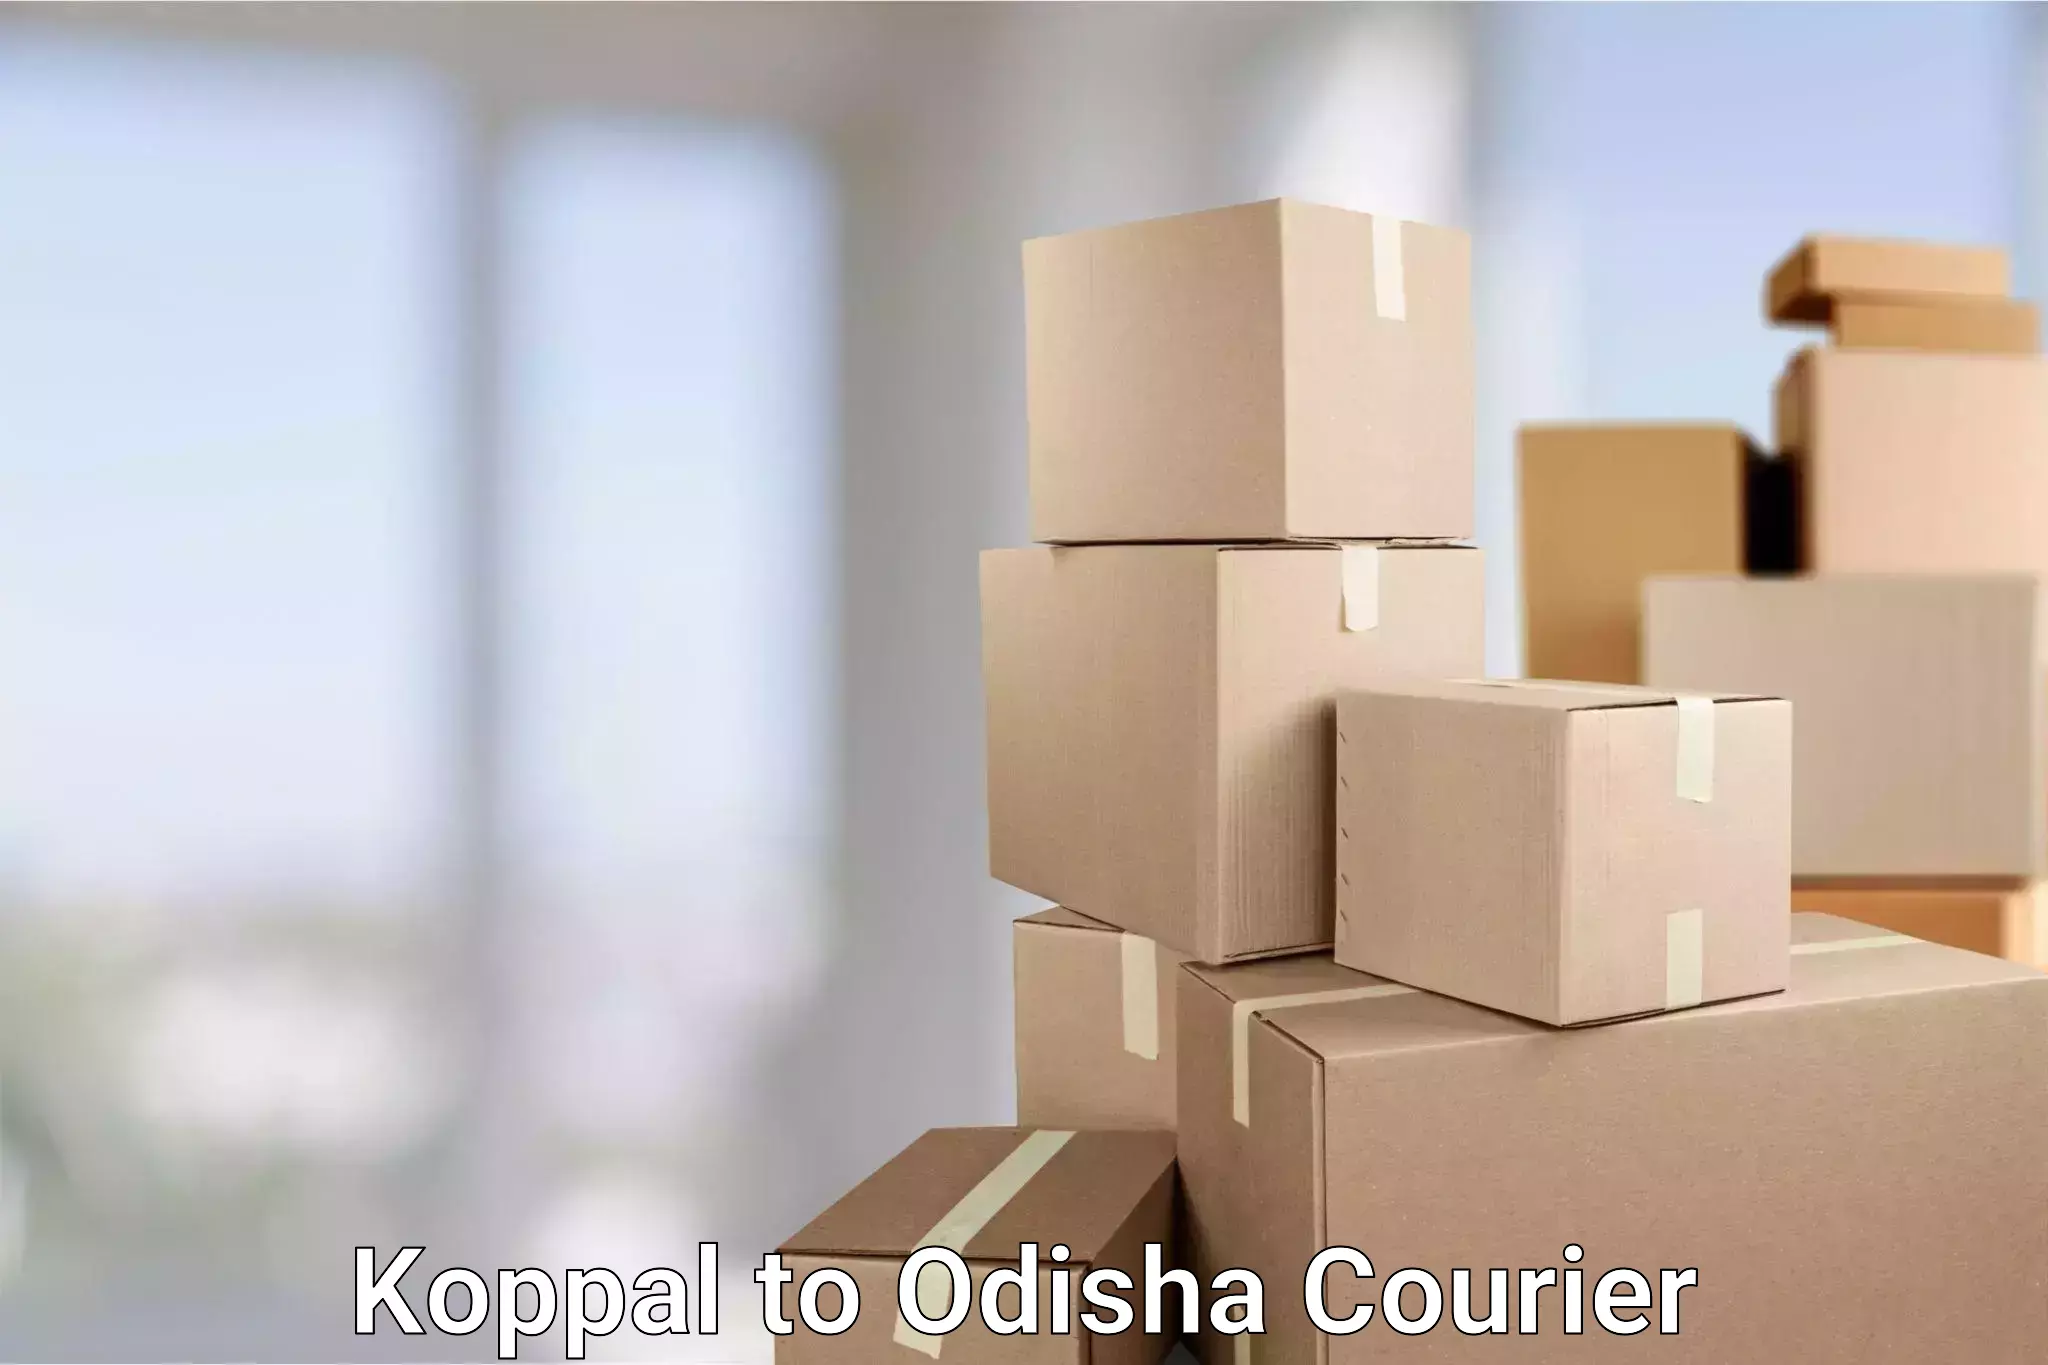 Reliable delivery network Koppal to Pallahara